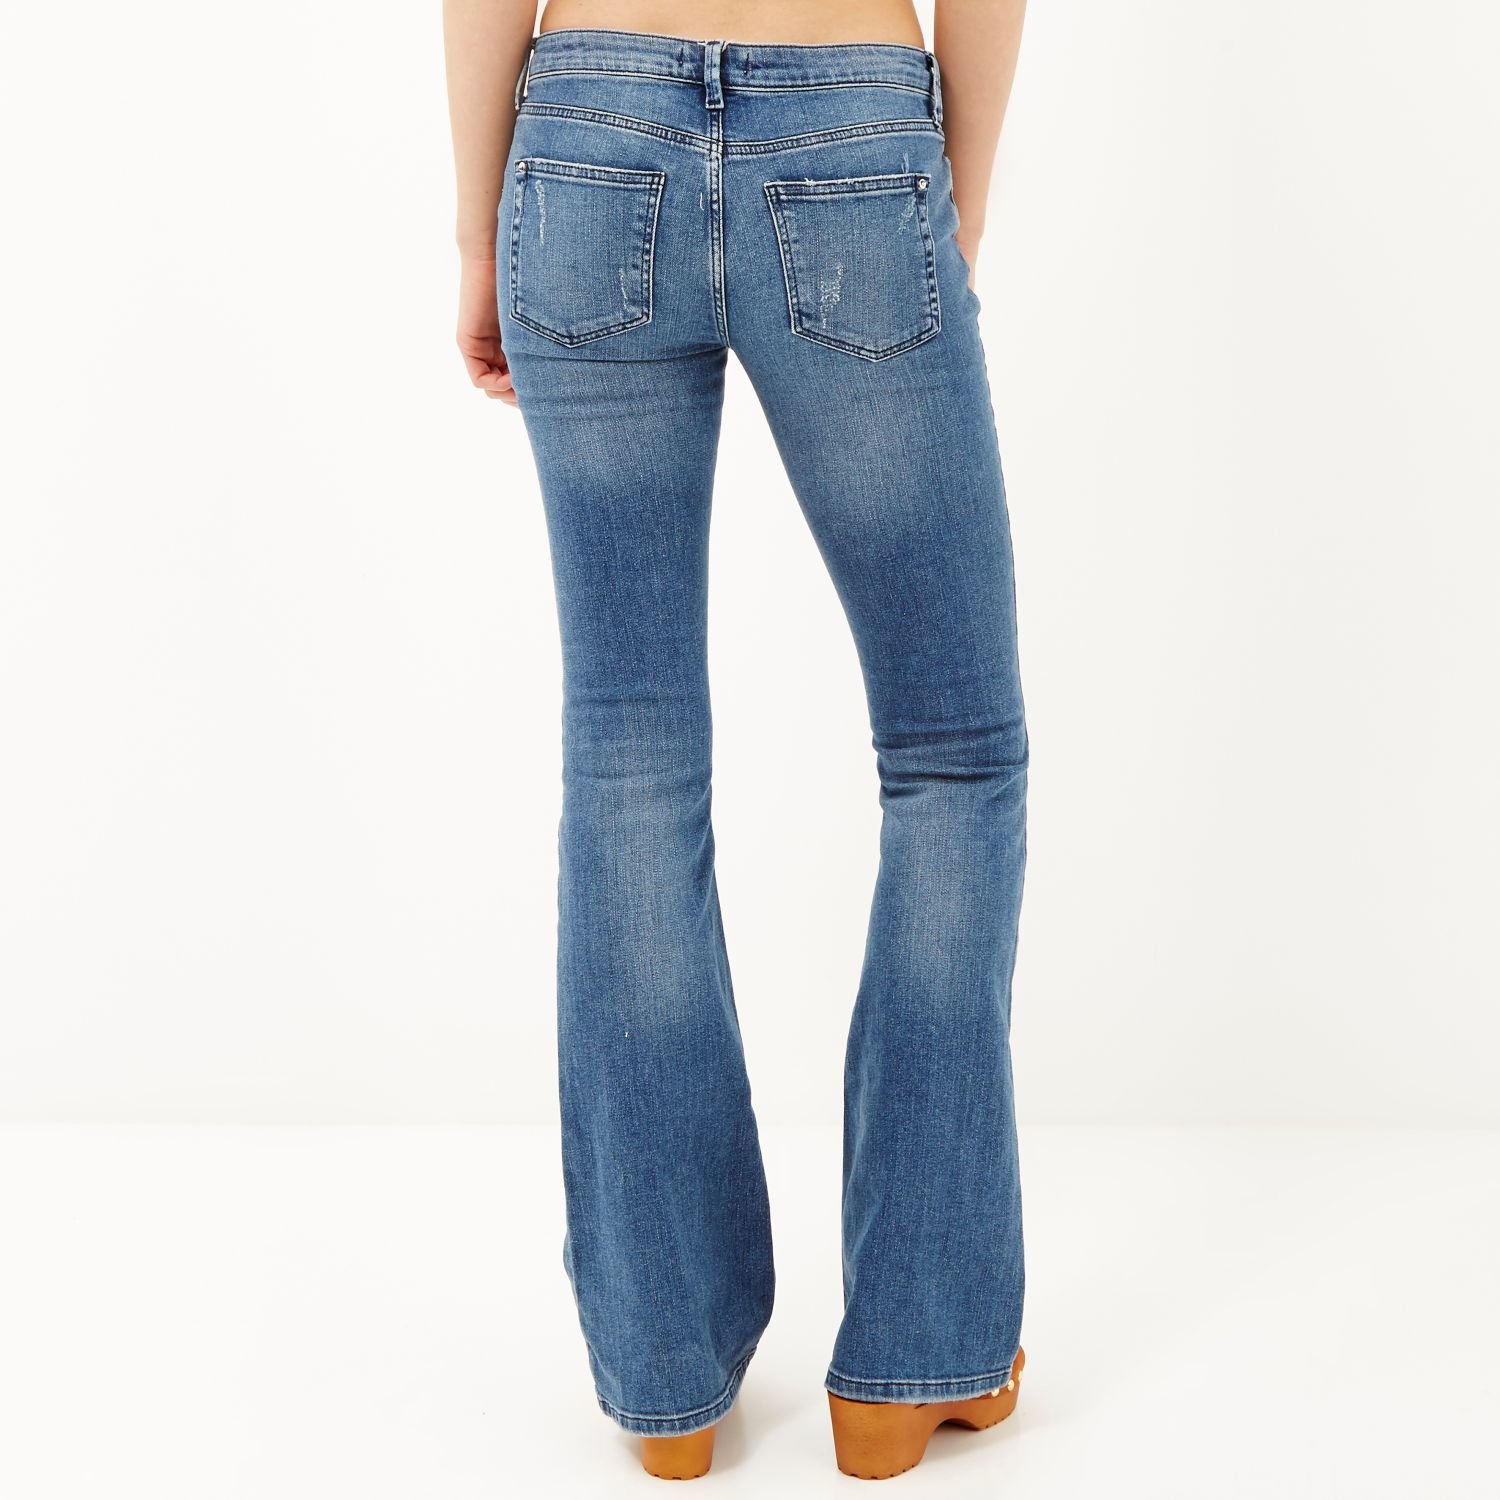 Lyst - River Island Mid Wash Brooke Flare Jeans in Blue